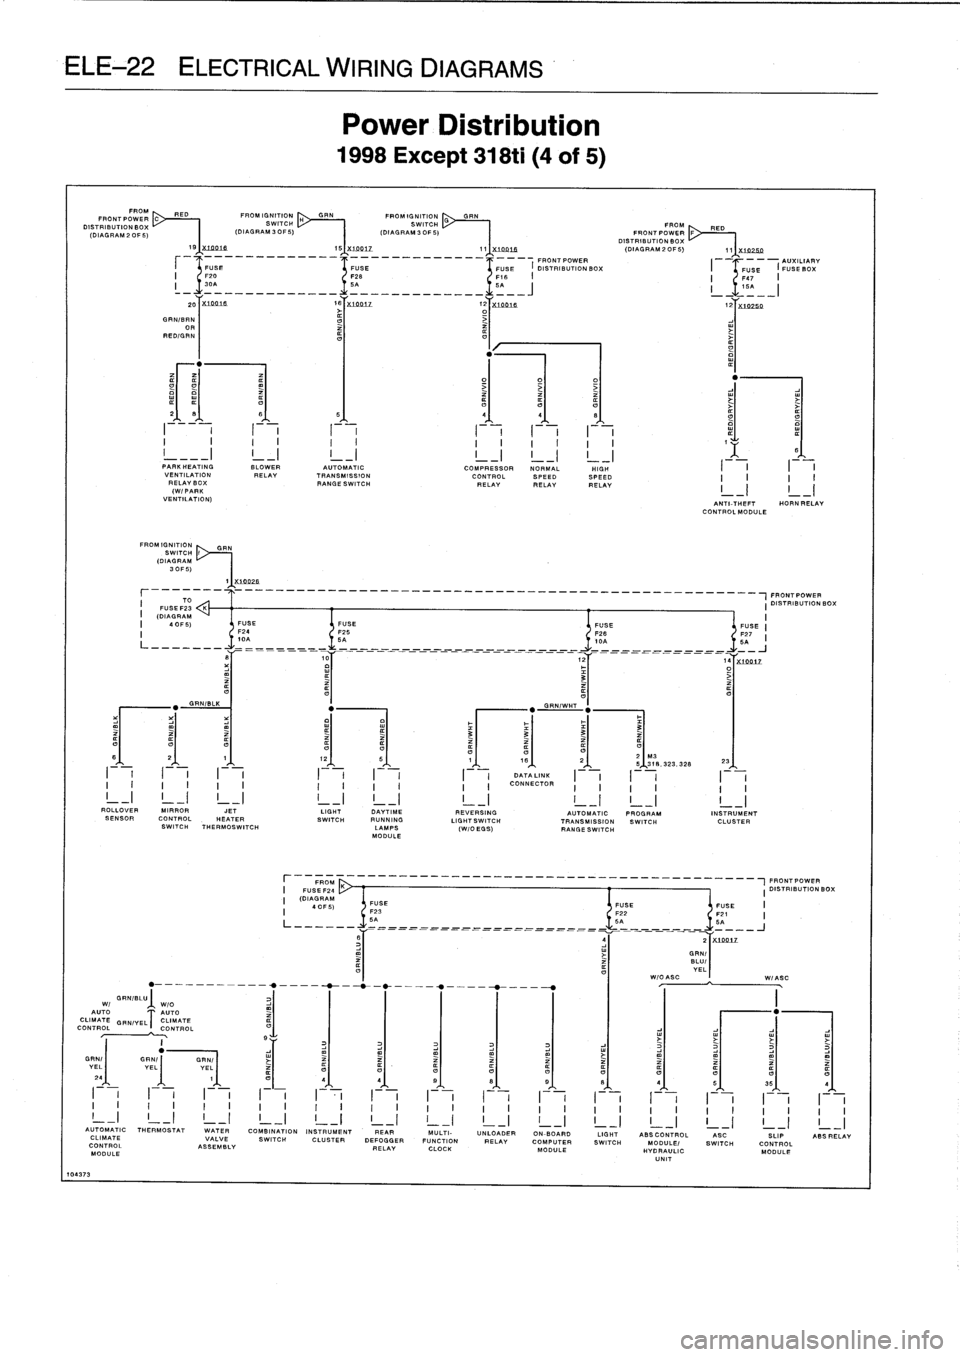 BMW 325i 1994 E36 Owners Guide 
ELE-22

ELECTRICAL
WIRING
DIAGRAMS

GRNIBLU
Wl

WIO

AUTO

AUTO

CLIMATE

GEN/YELT
CLIMATE

CONTROL

CONTROL

10437
3

FP

OM~
	

PED
FRONTPOWER
DISTRIBUTION

BOY%

(DIAGRAM

2
OF
5)

S

FROMIGNITION